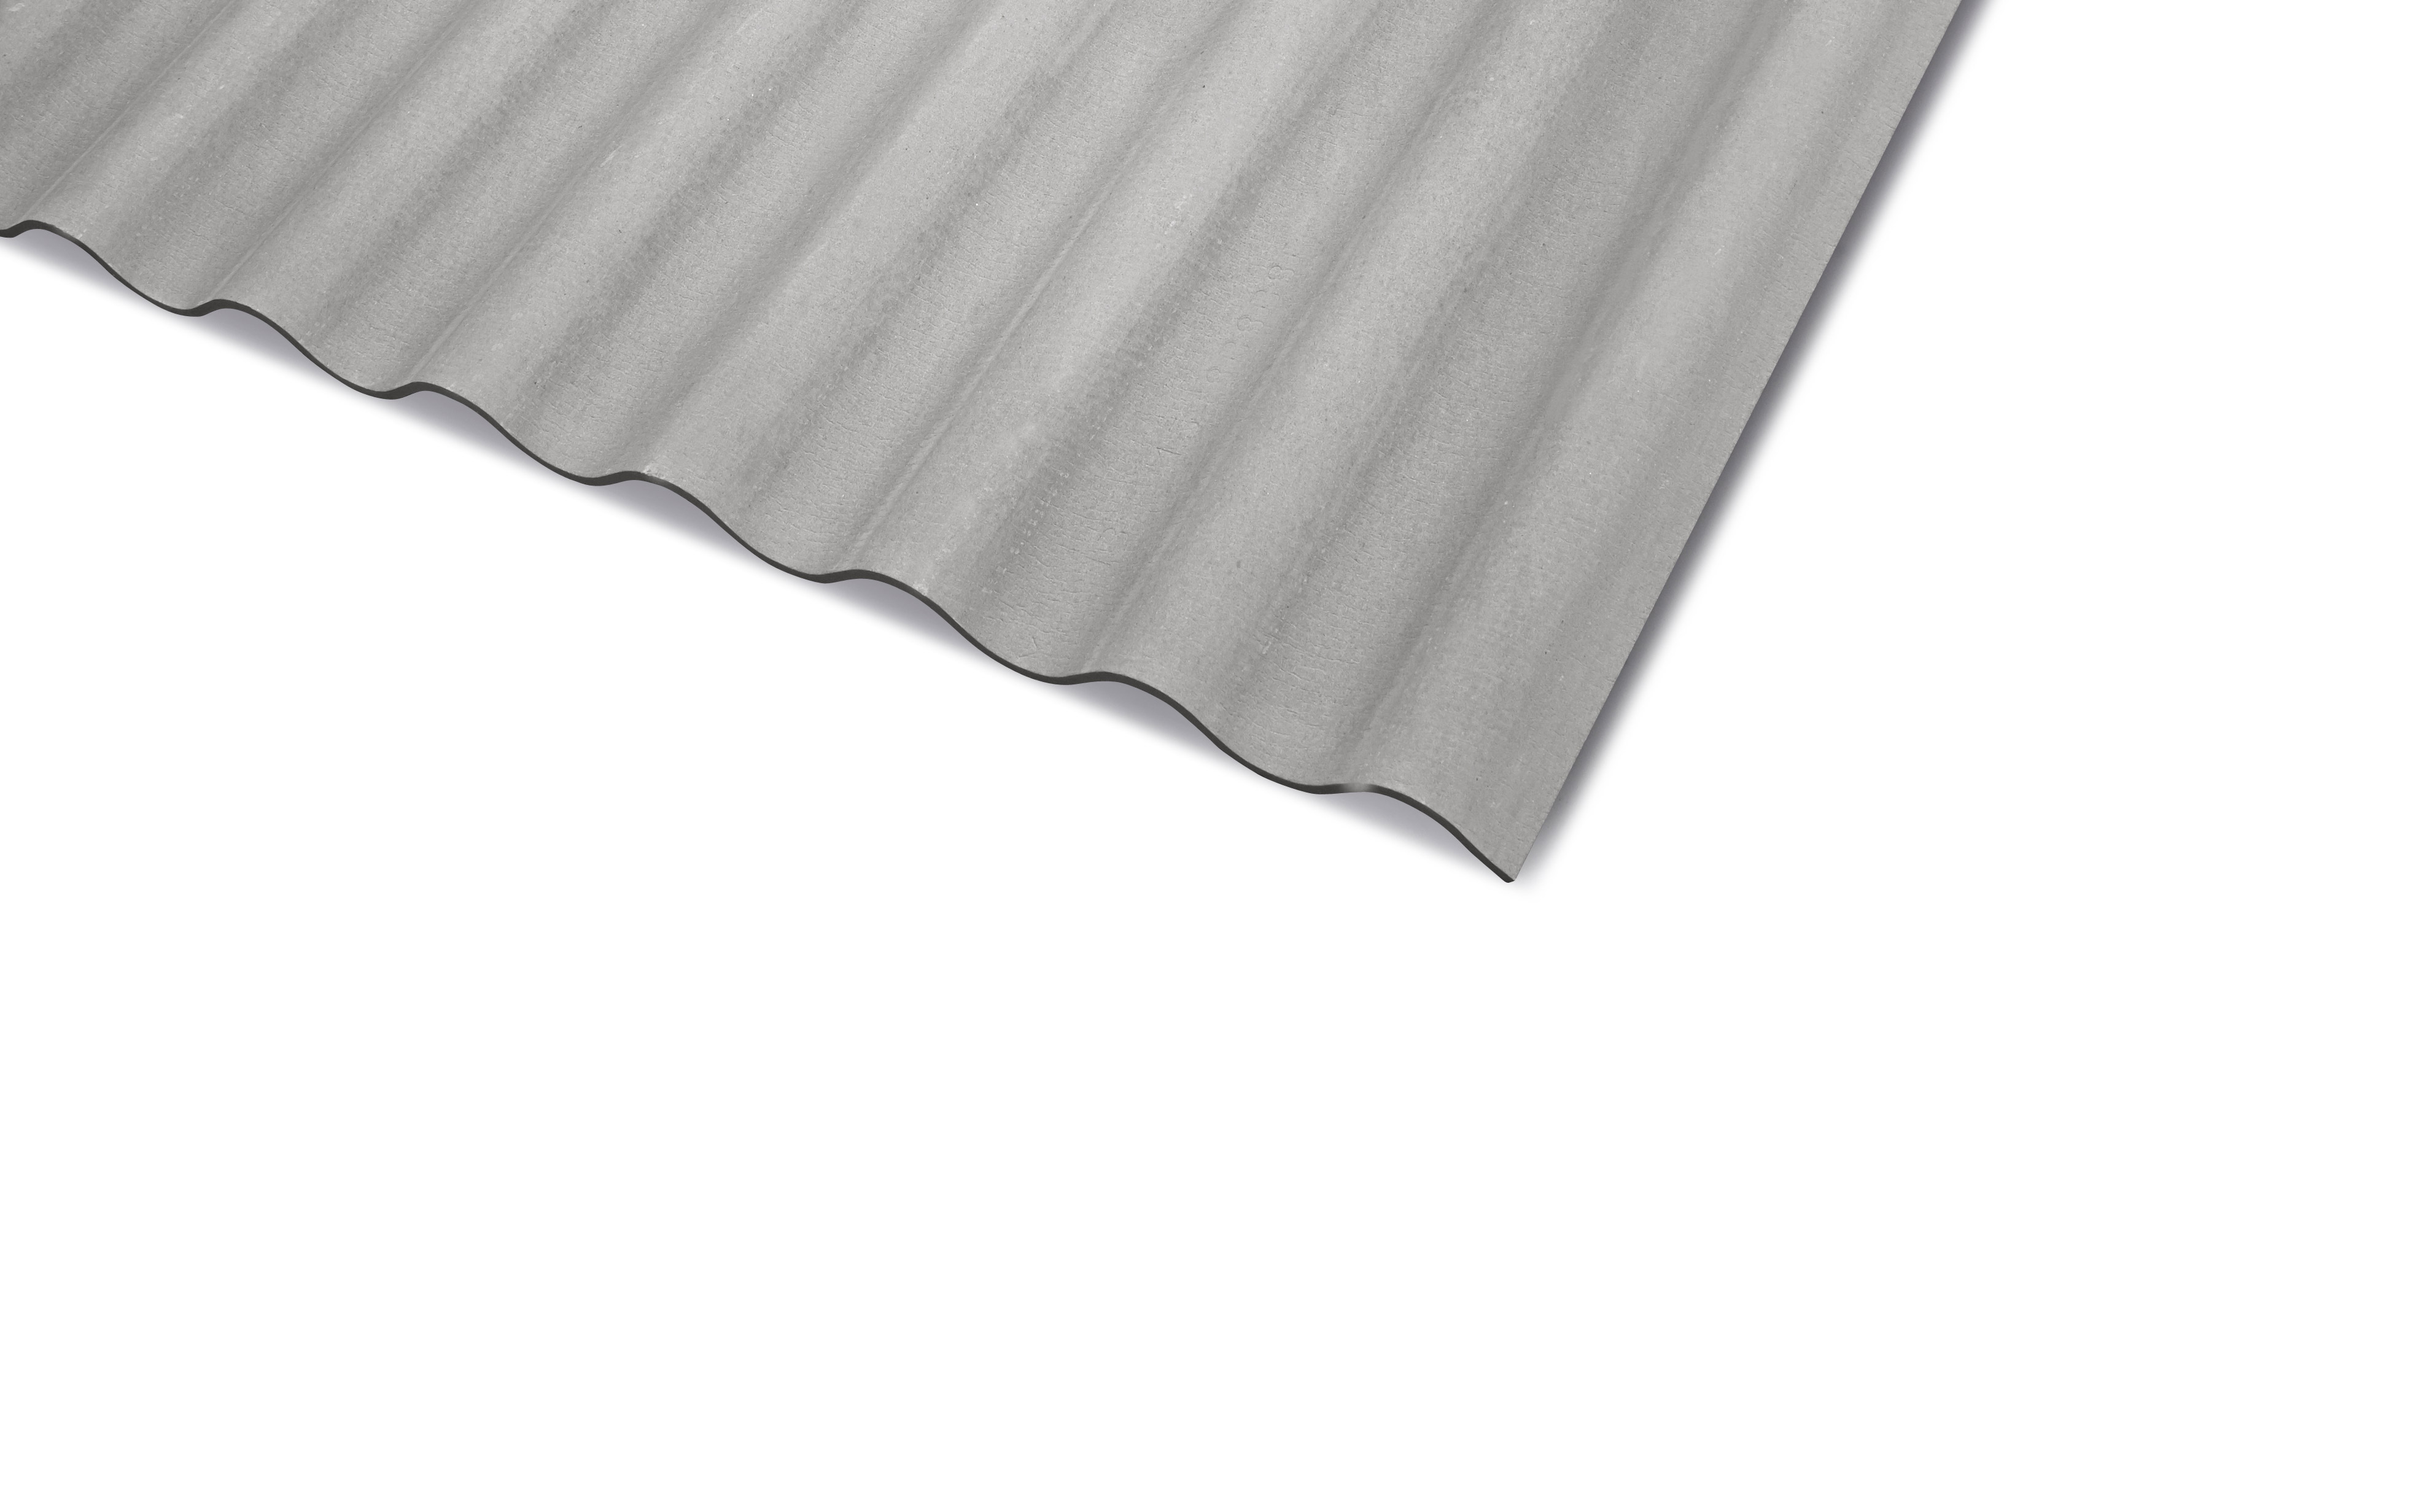 Cembrit B5 Fibre Cement Sheeting (P3 Profile Style) 910mm Cover Width